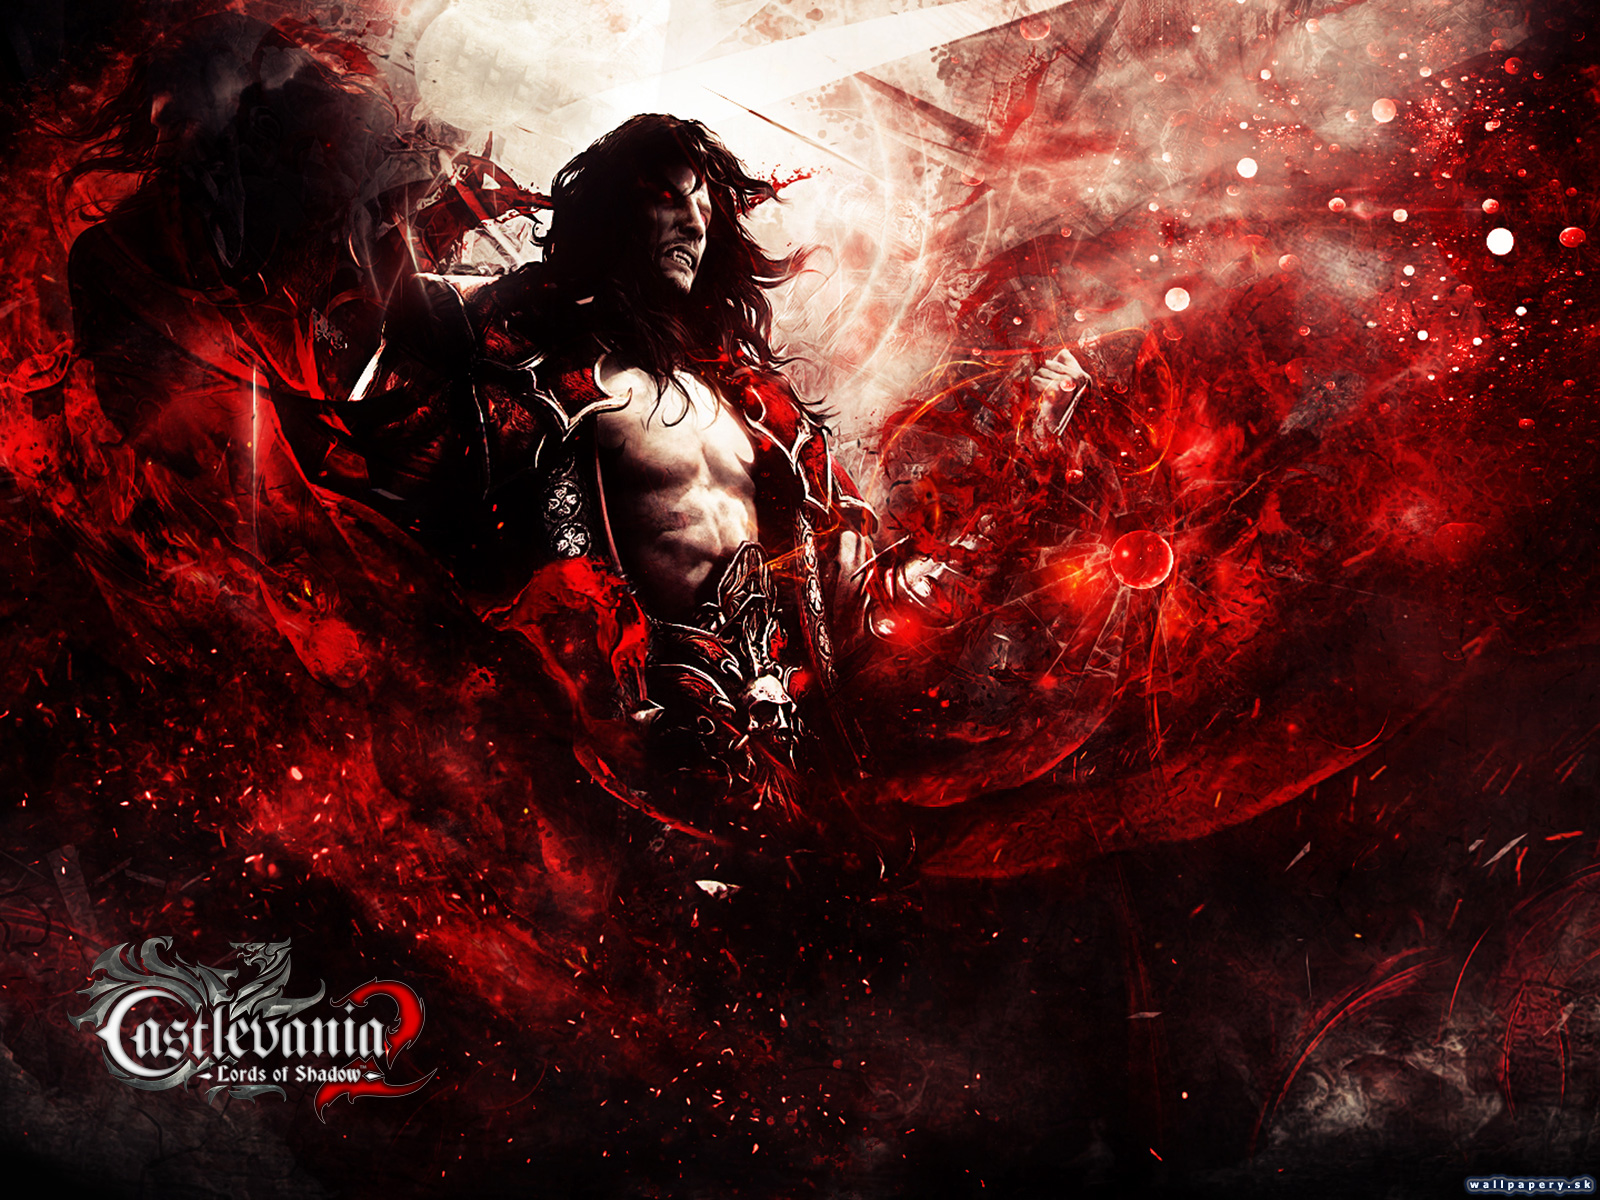 Castlevania: Lords of Shadow 2 - wallpaper 5